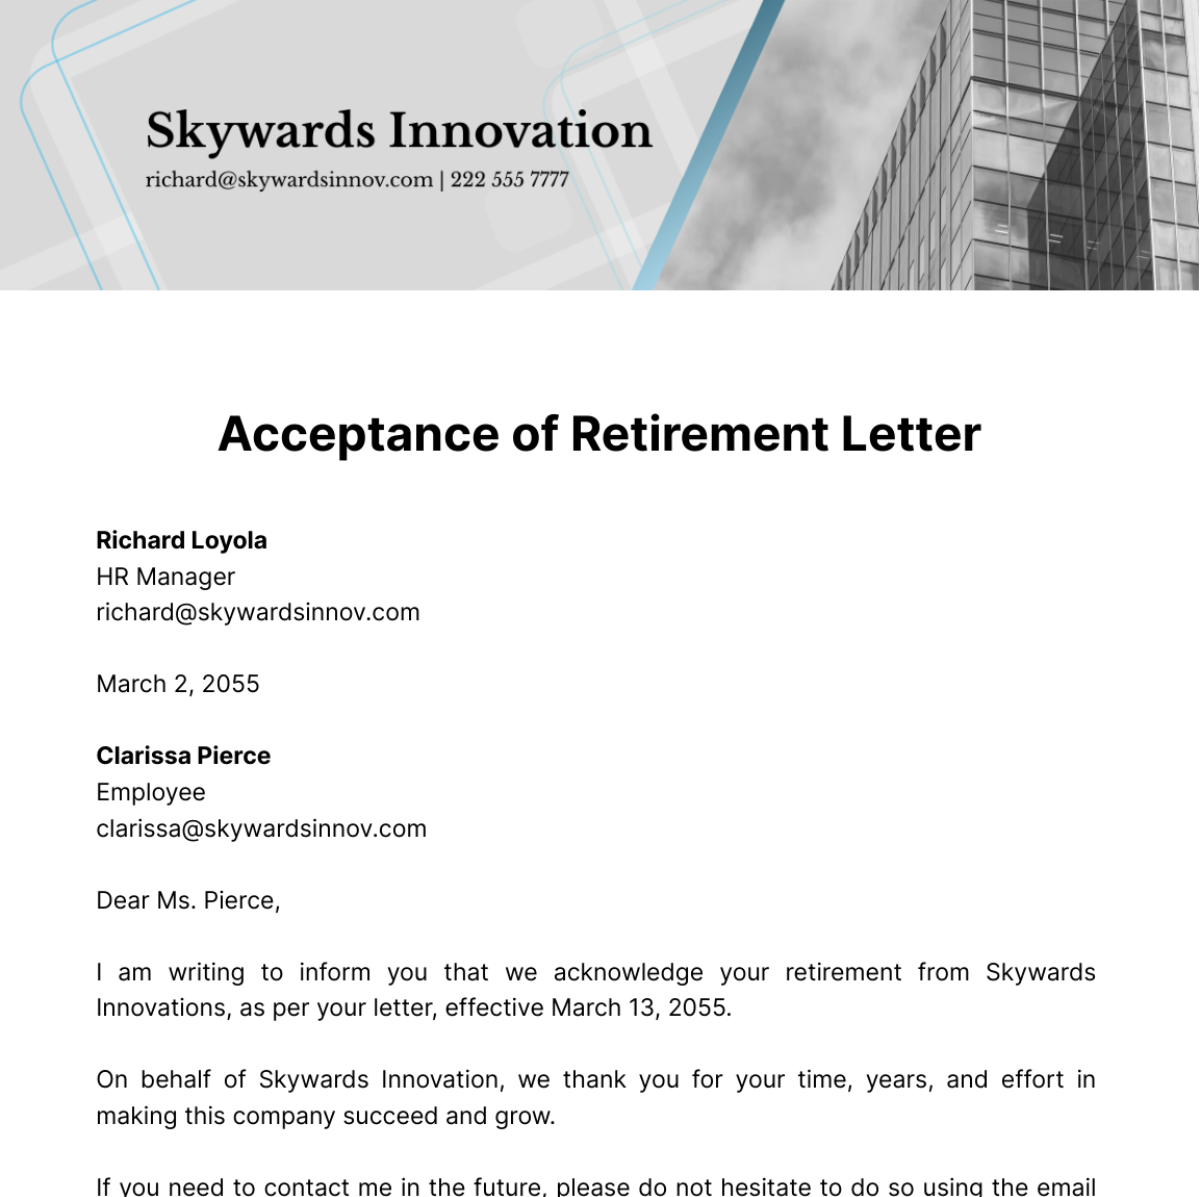 Acceptance of Retirement Letter Template